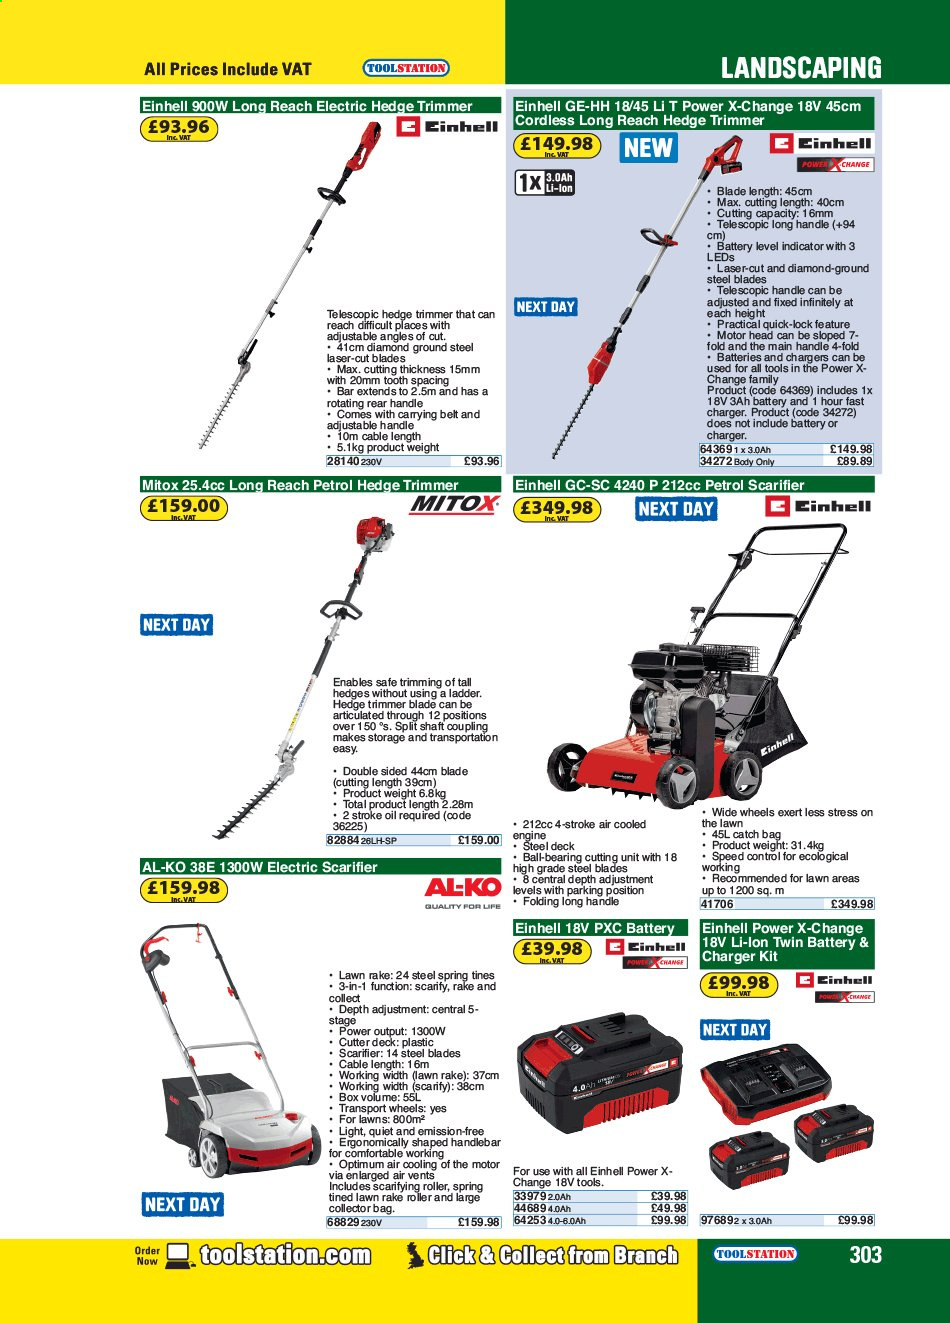 Toolstation offer . Page 303.